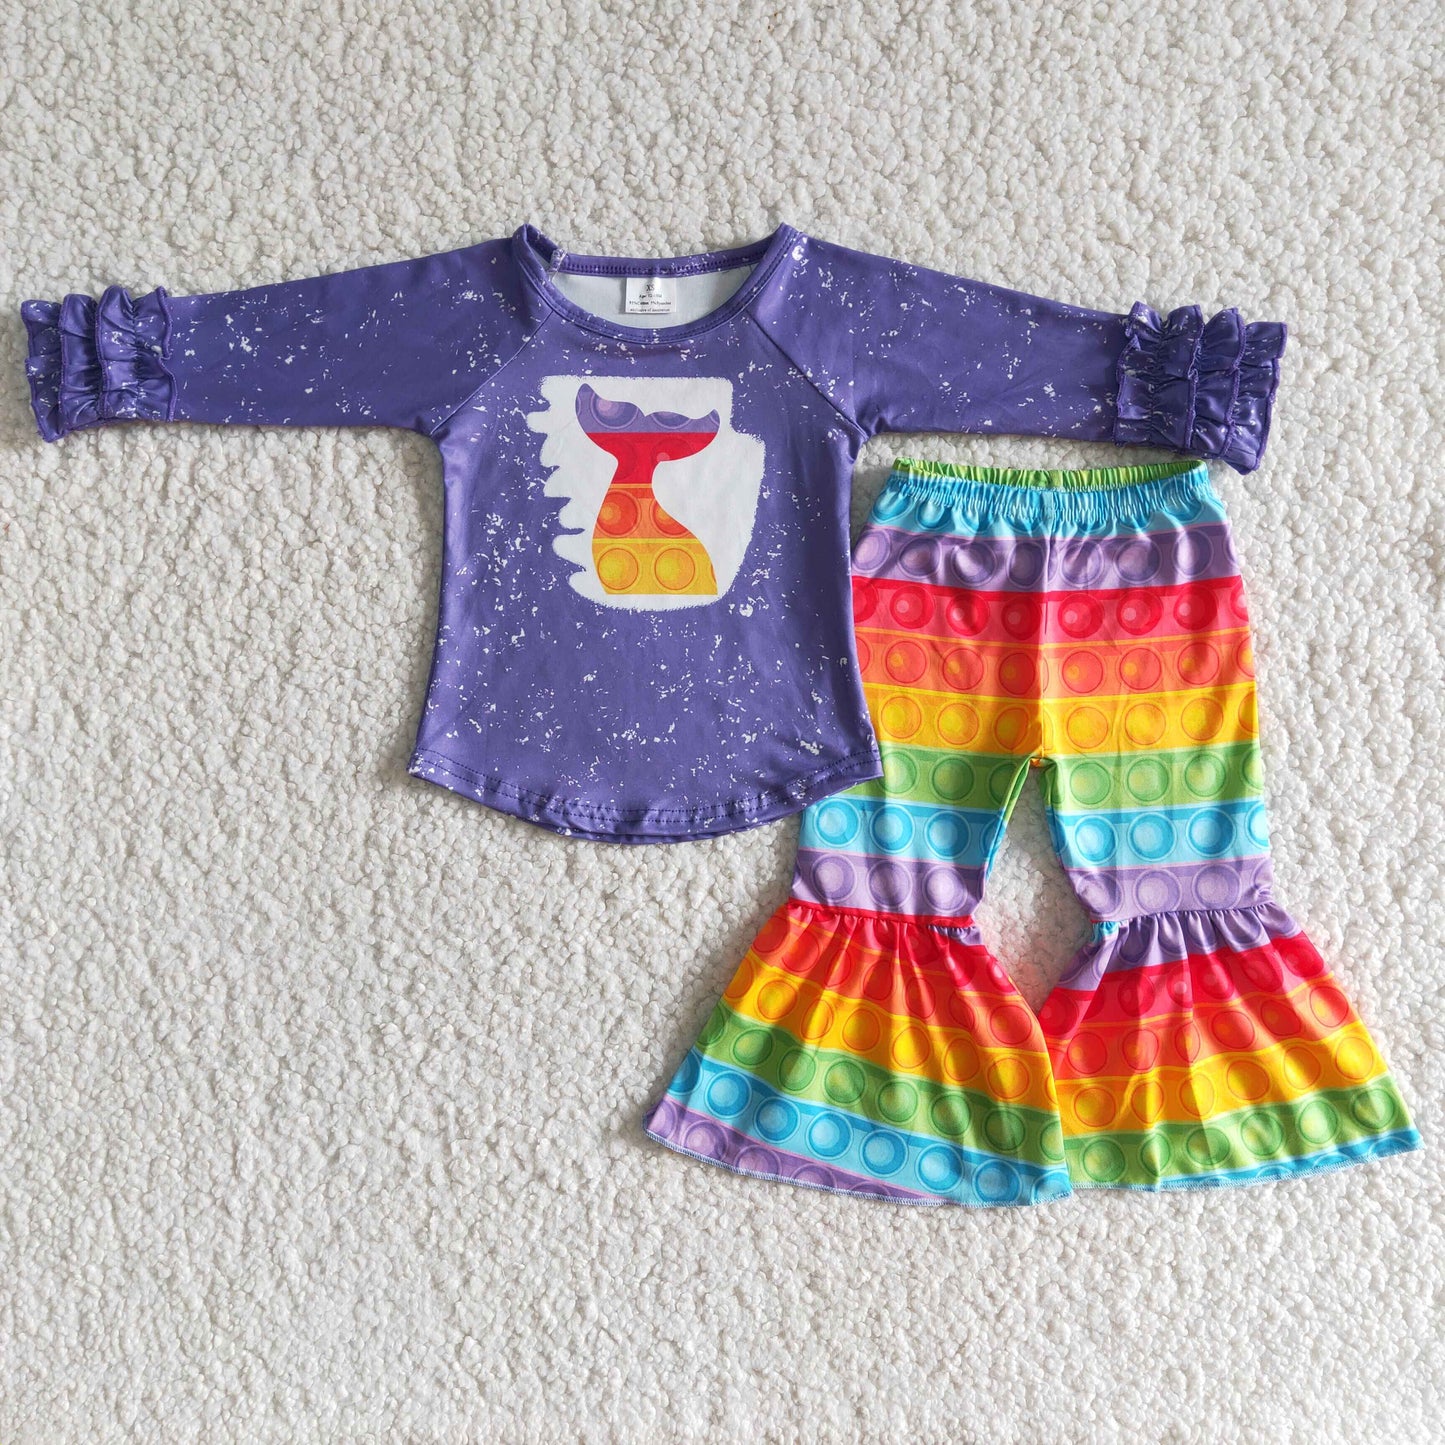 baby girls purple color outfit